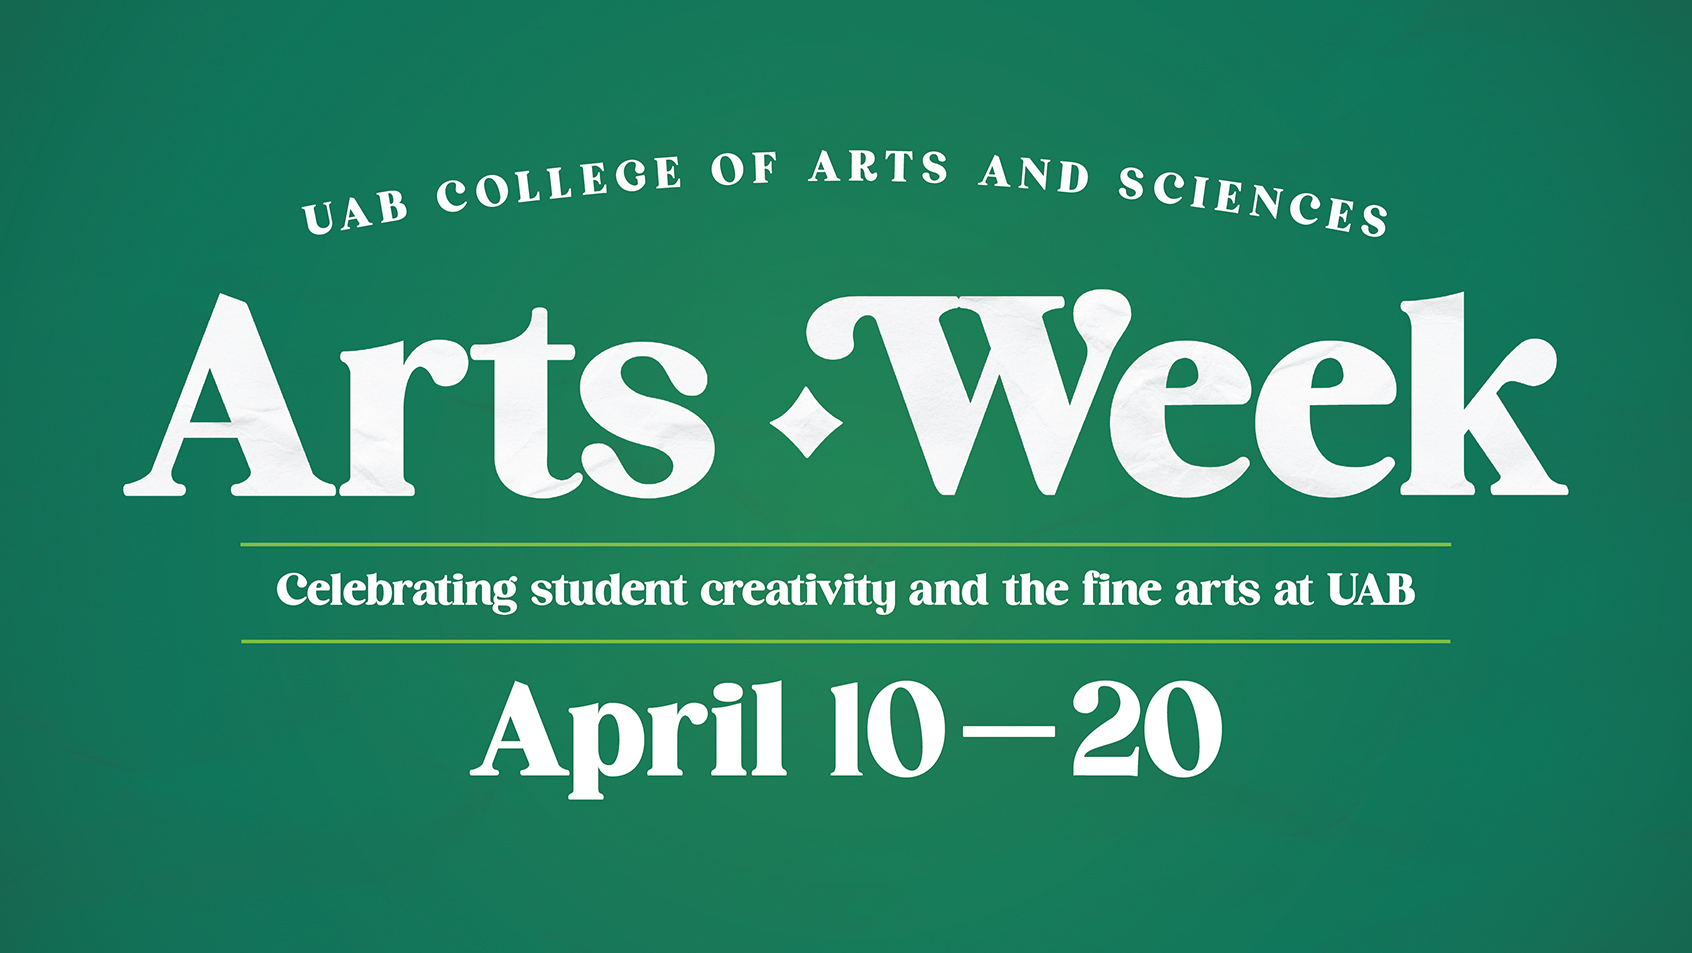 UAB College of Arts and Sciences Arts Week: Celebrating student creativity and the fine arts at UAB